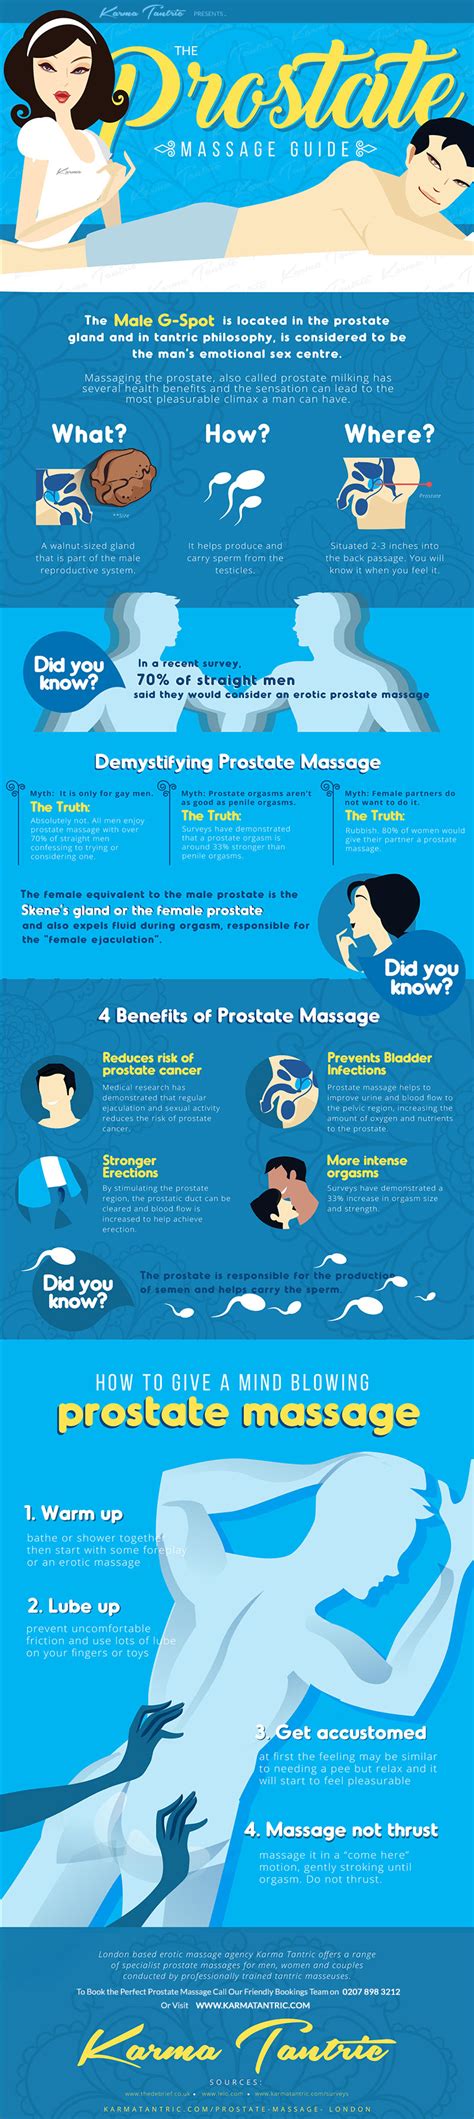 the ultimate prostate massage guide infographic orgasm